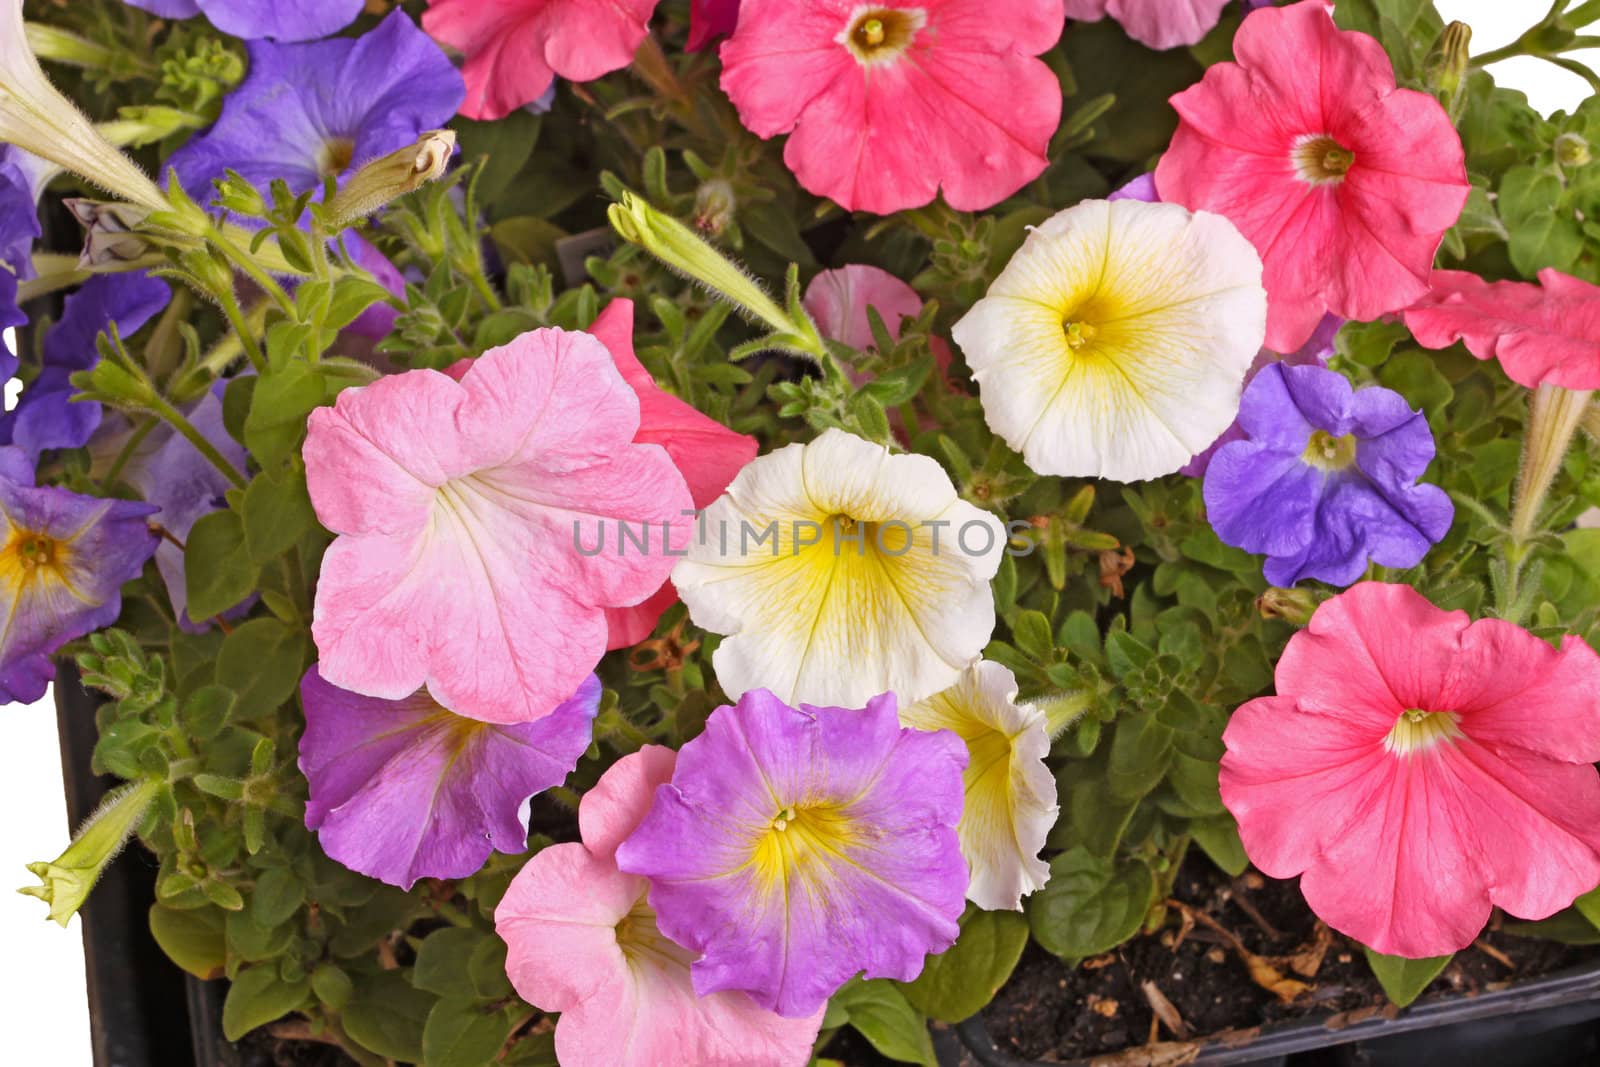 Multiple flowers of different colored petunias (Petunia hybrida) fill the frame